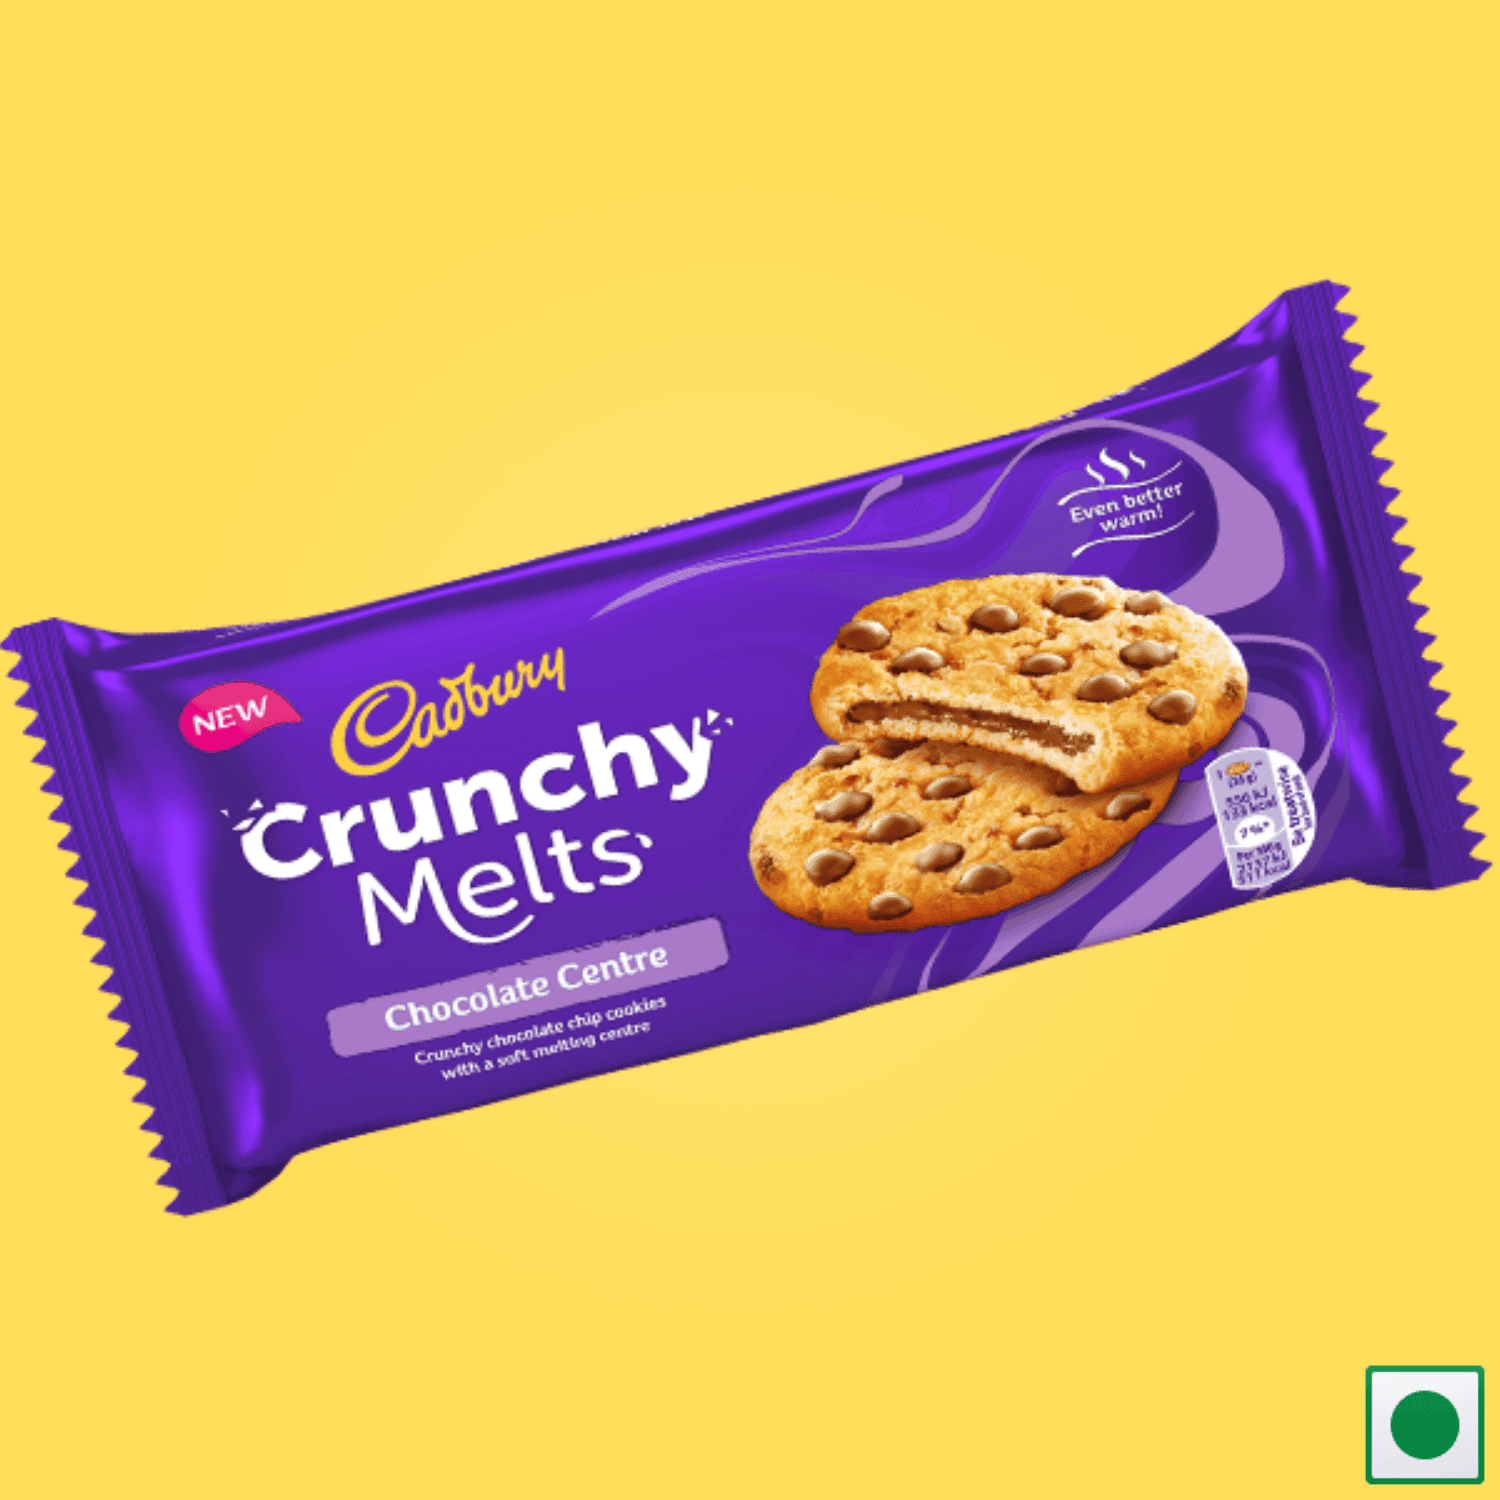 Cadbury Crunchy Melts Chocolate Centre Cookies, 160g (Imported) - Super 7 Mart